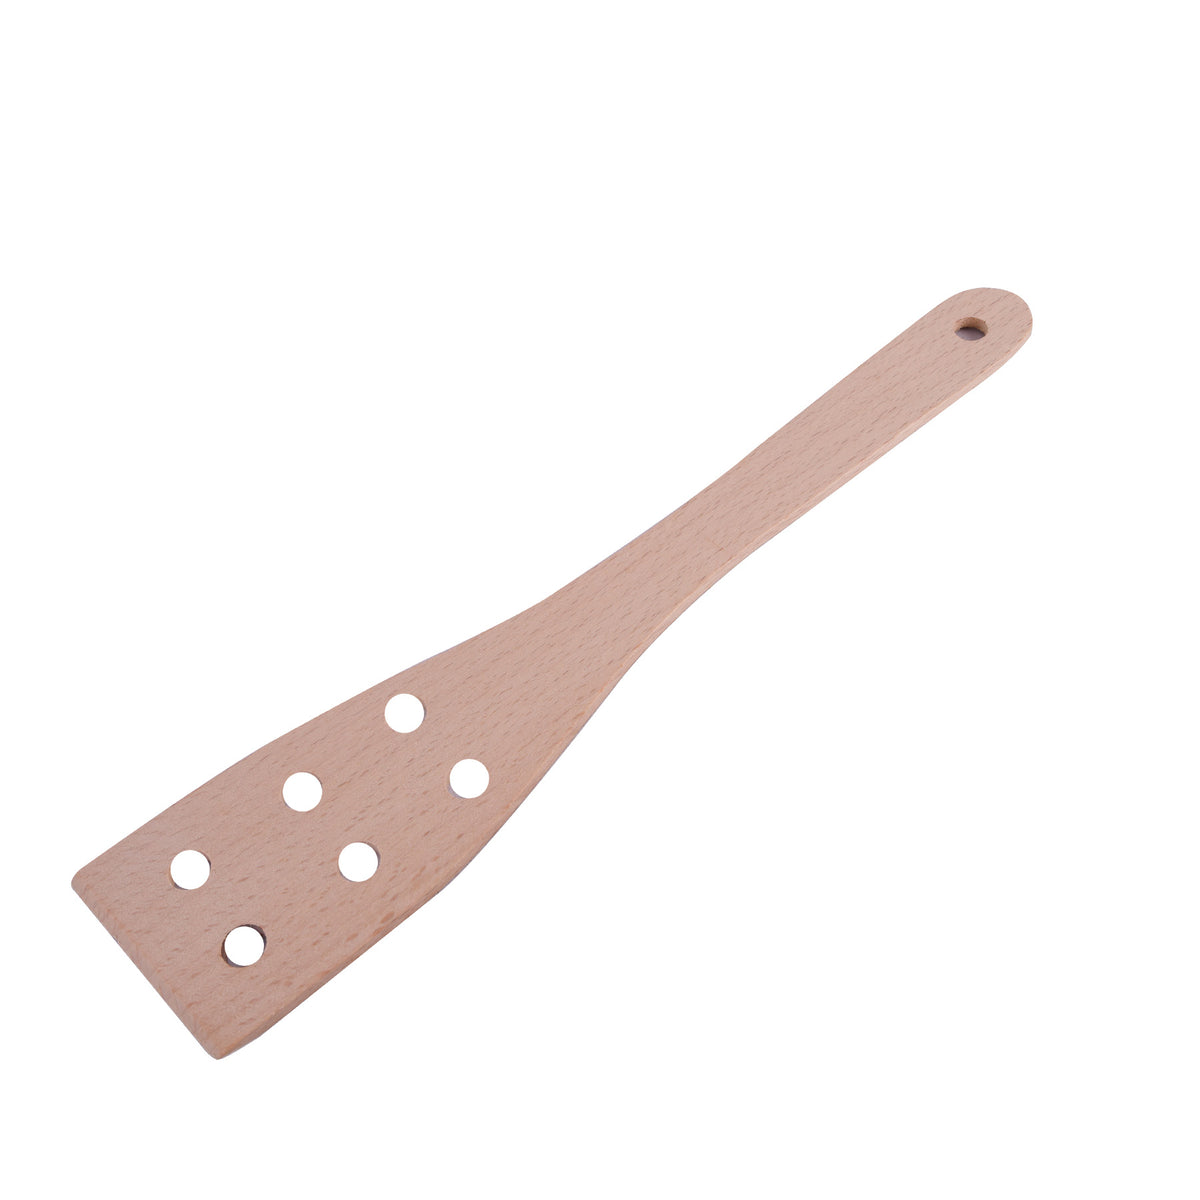 Wooden Narrow spatula with holes, NaturalSize: 30 cm